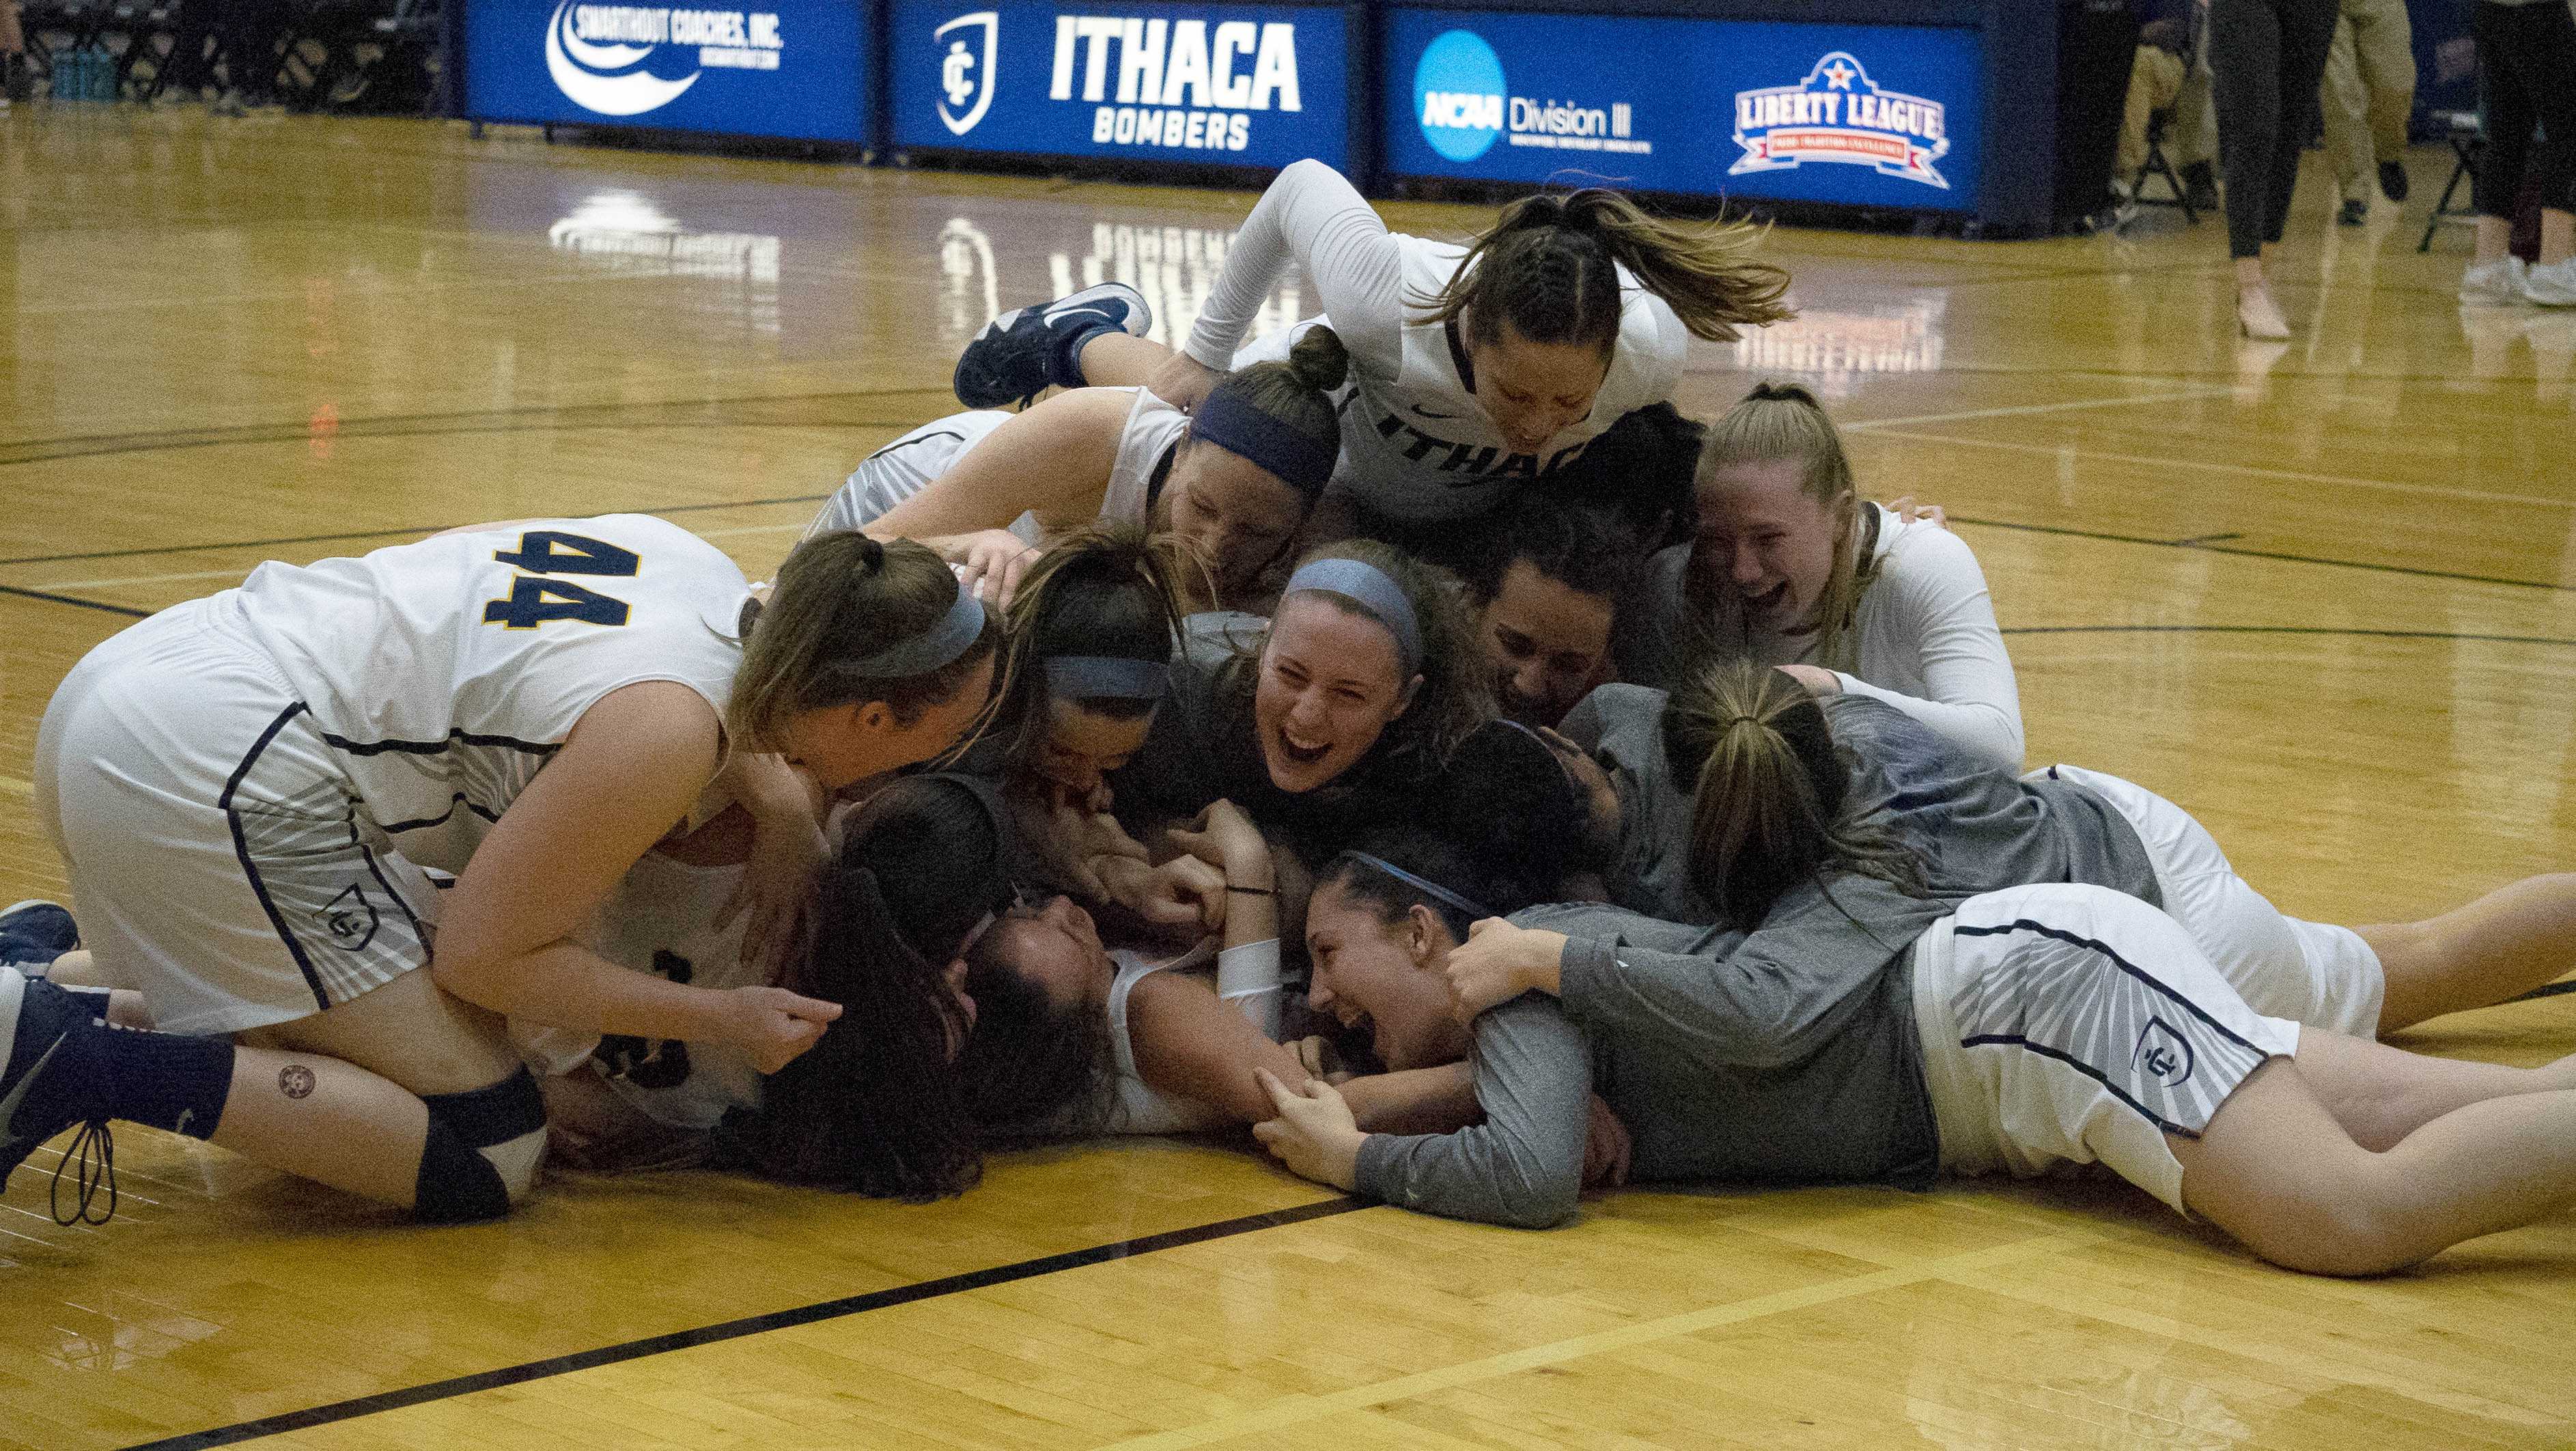 Women’s basketball beats RIT in overtime thriller to win Liberty League title